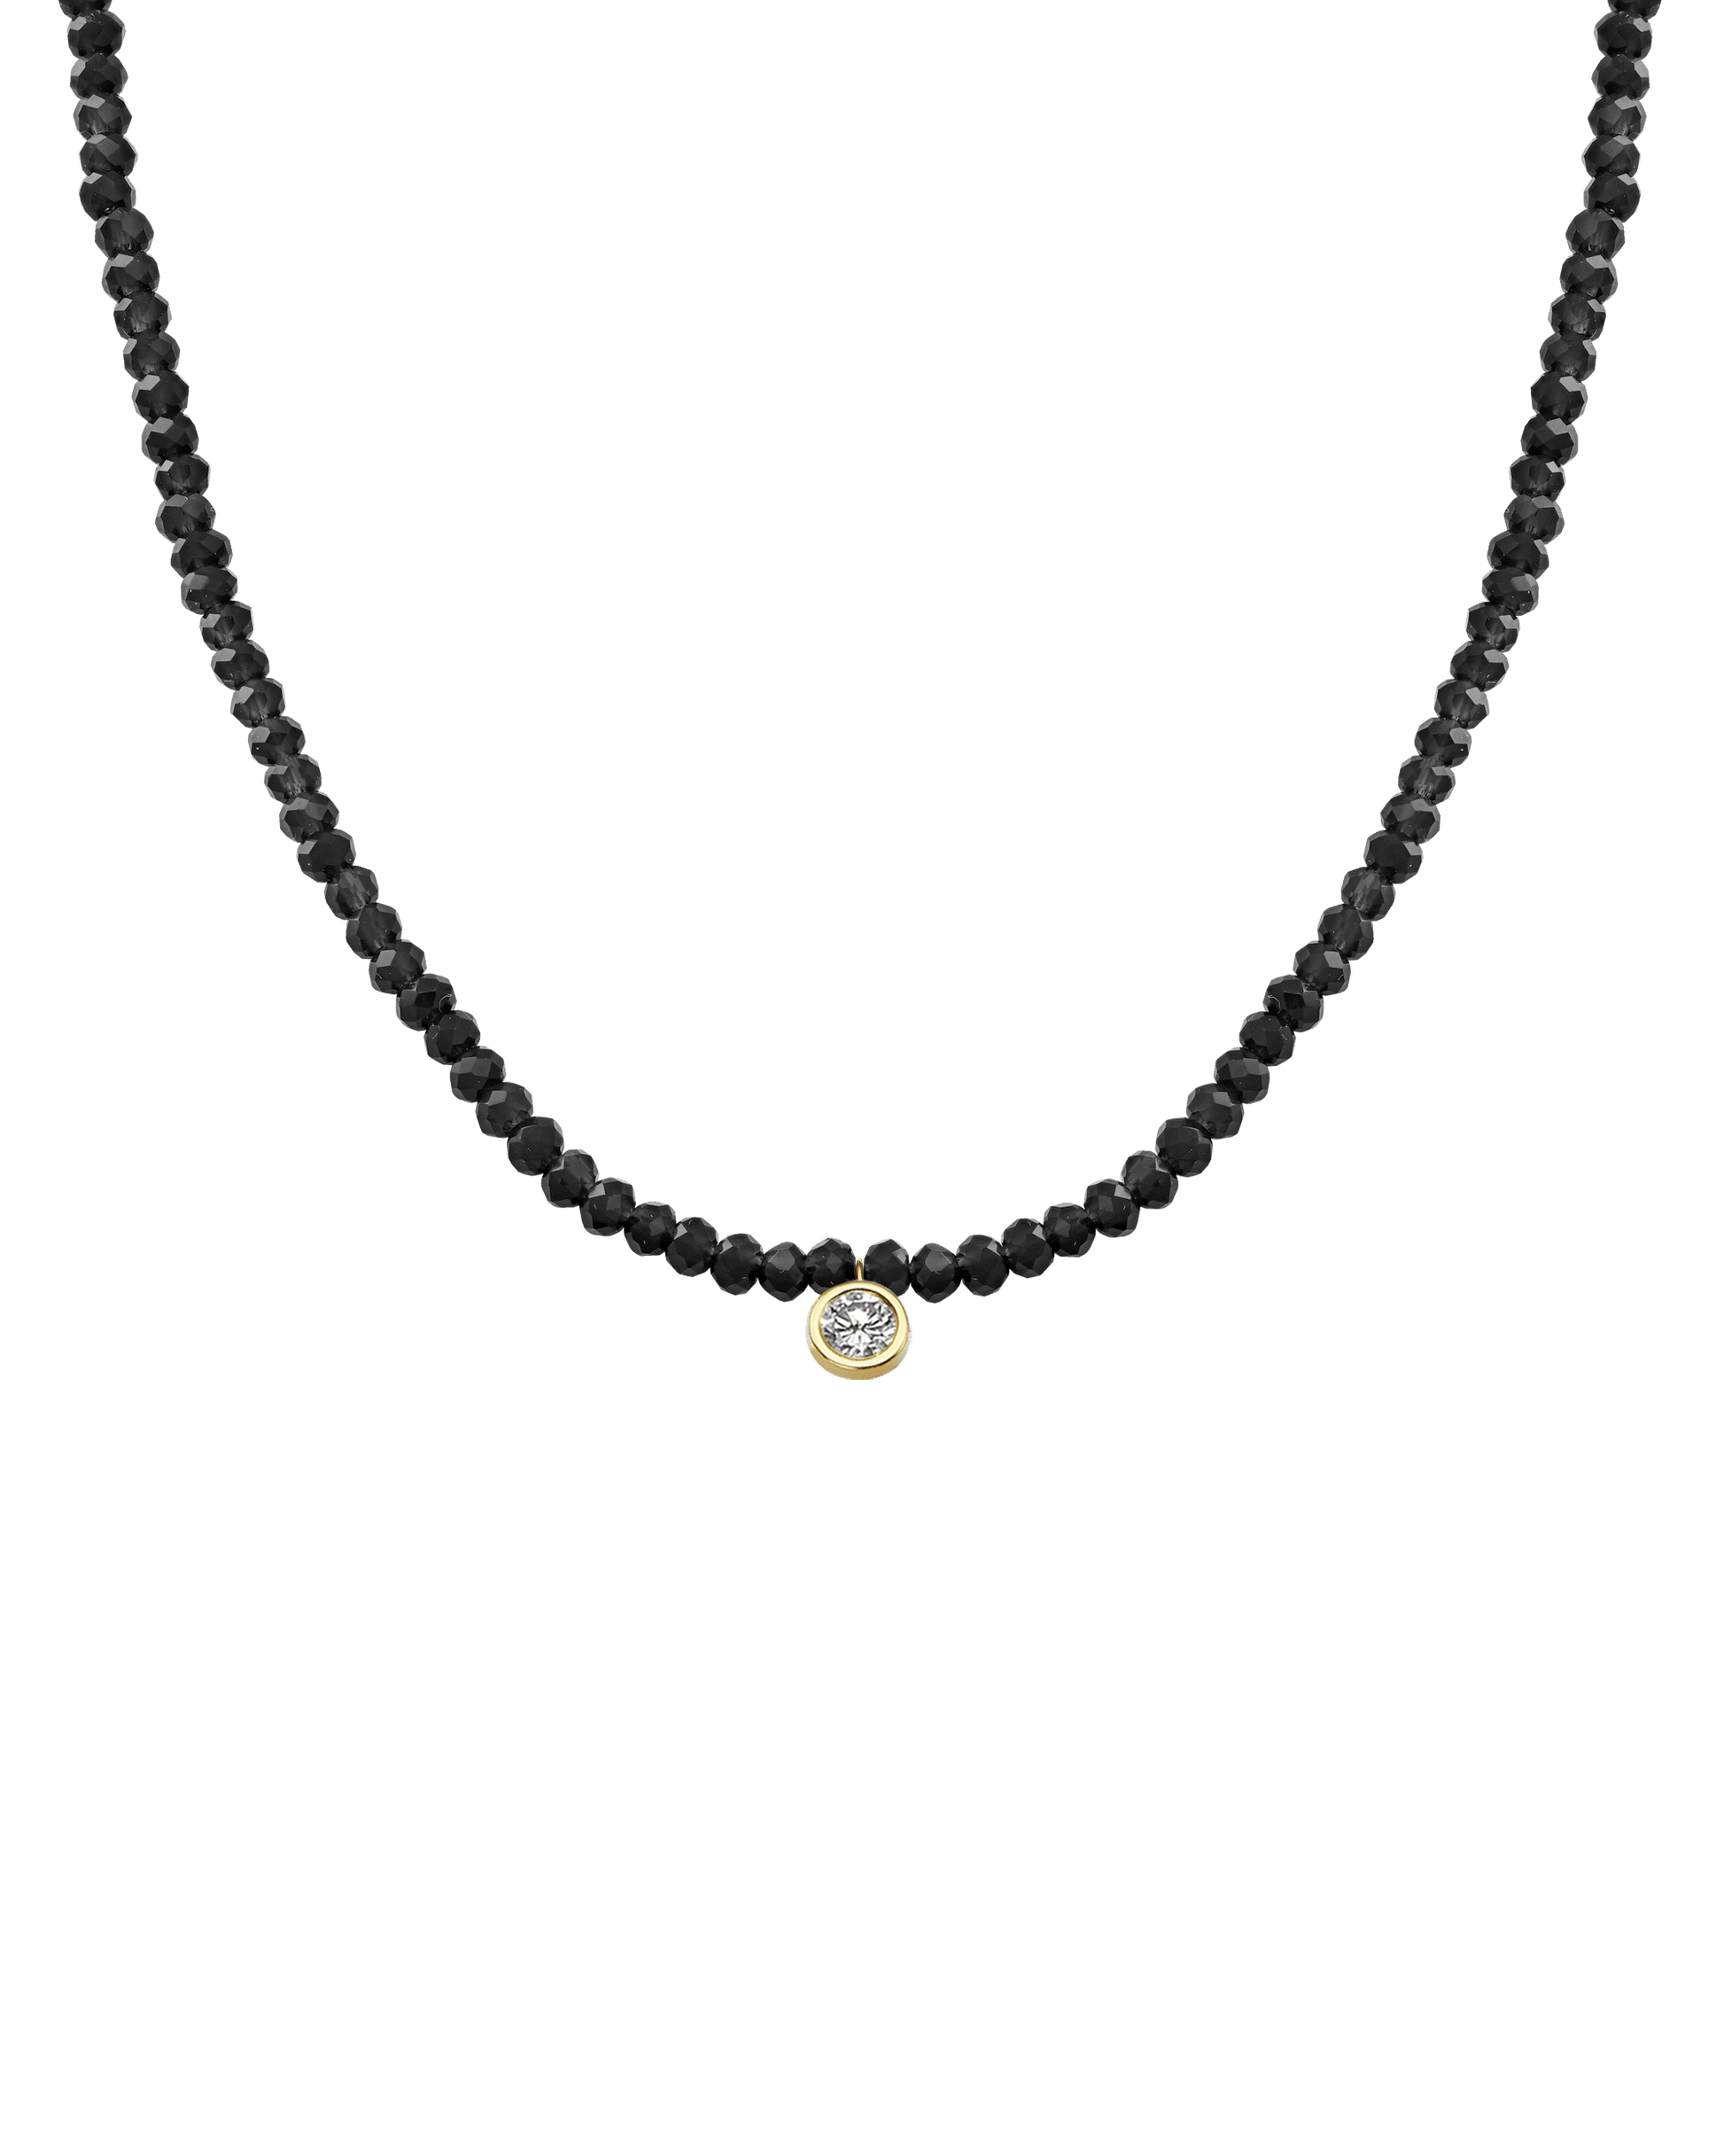 Apatite Gemstone & Diamond Necklace - 14K Yellow Gold Necklaces 14K Solid Gold Glass Beads Black Spinnel Extra Large: 0.20ct 14"